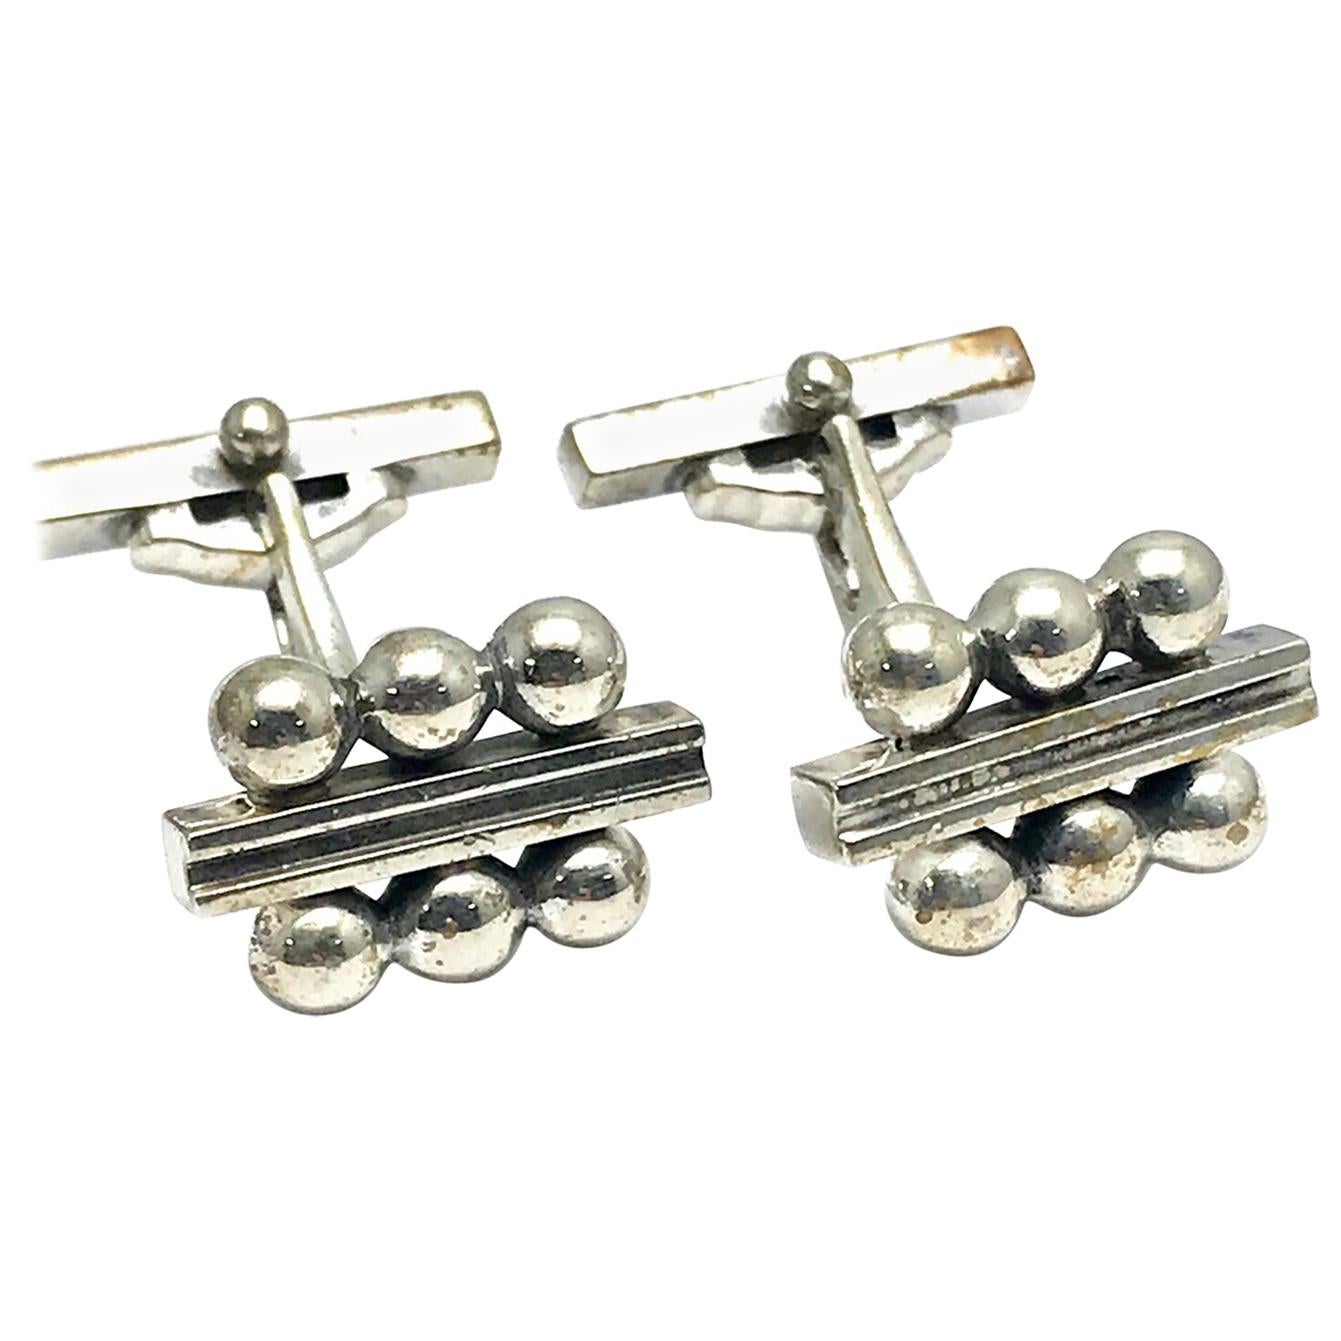 Georg Jensen Sterling Silver Cufflinks No. 61B with a Toggle Back